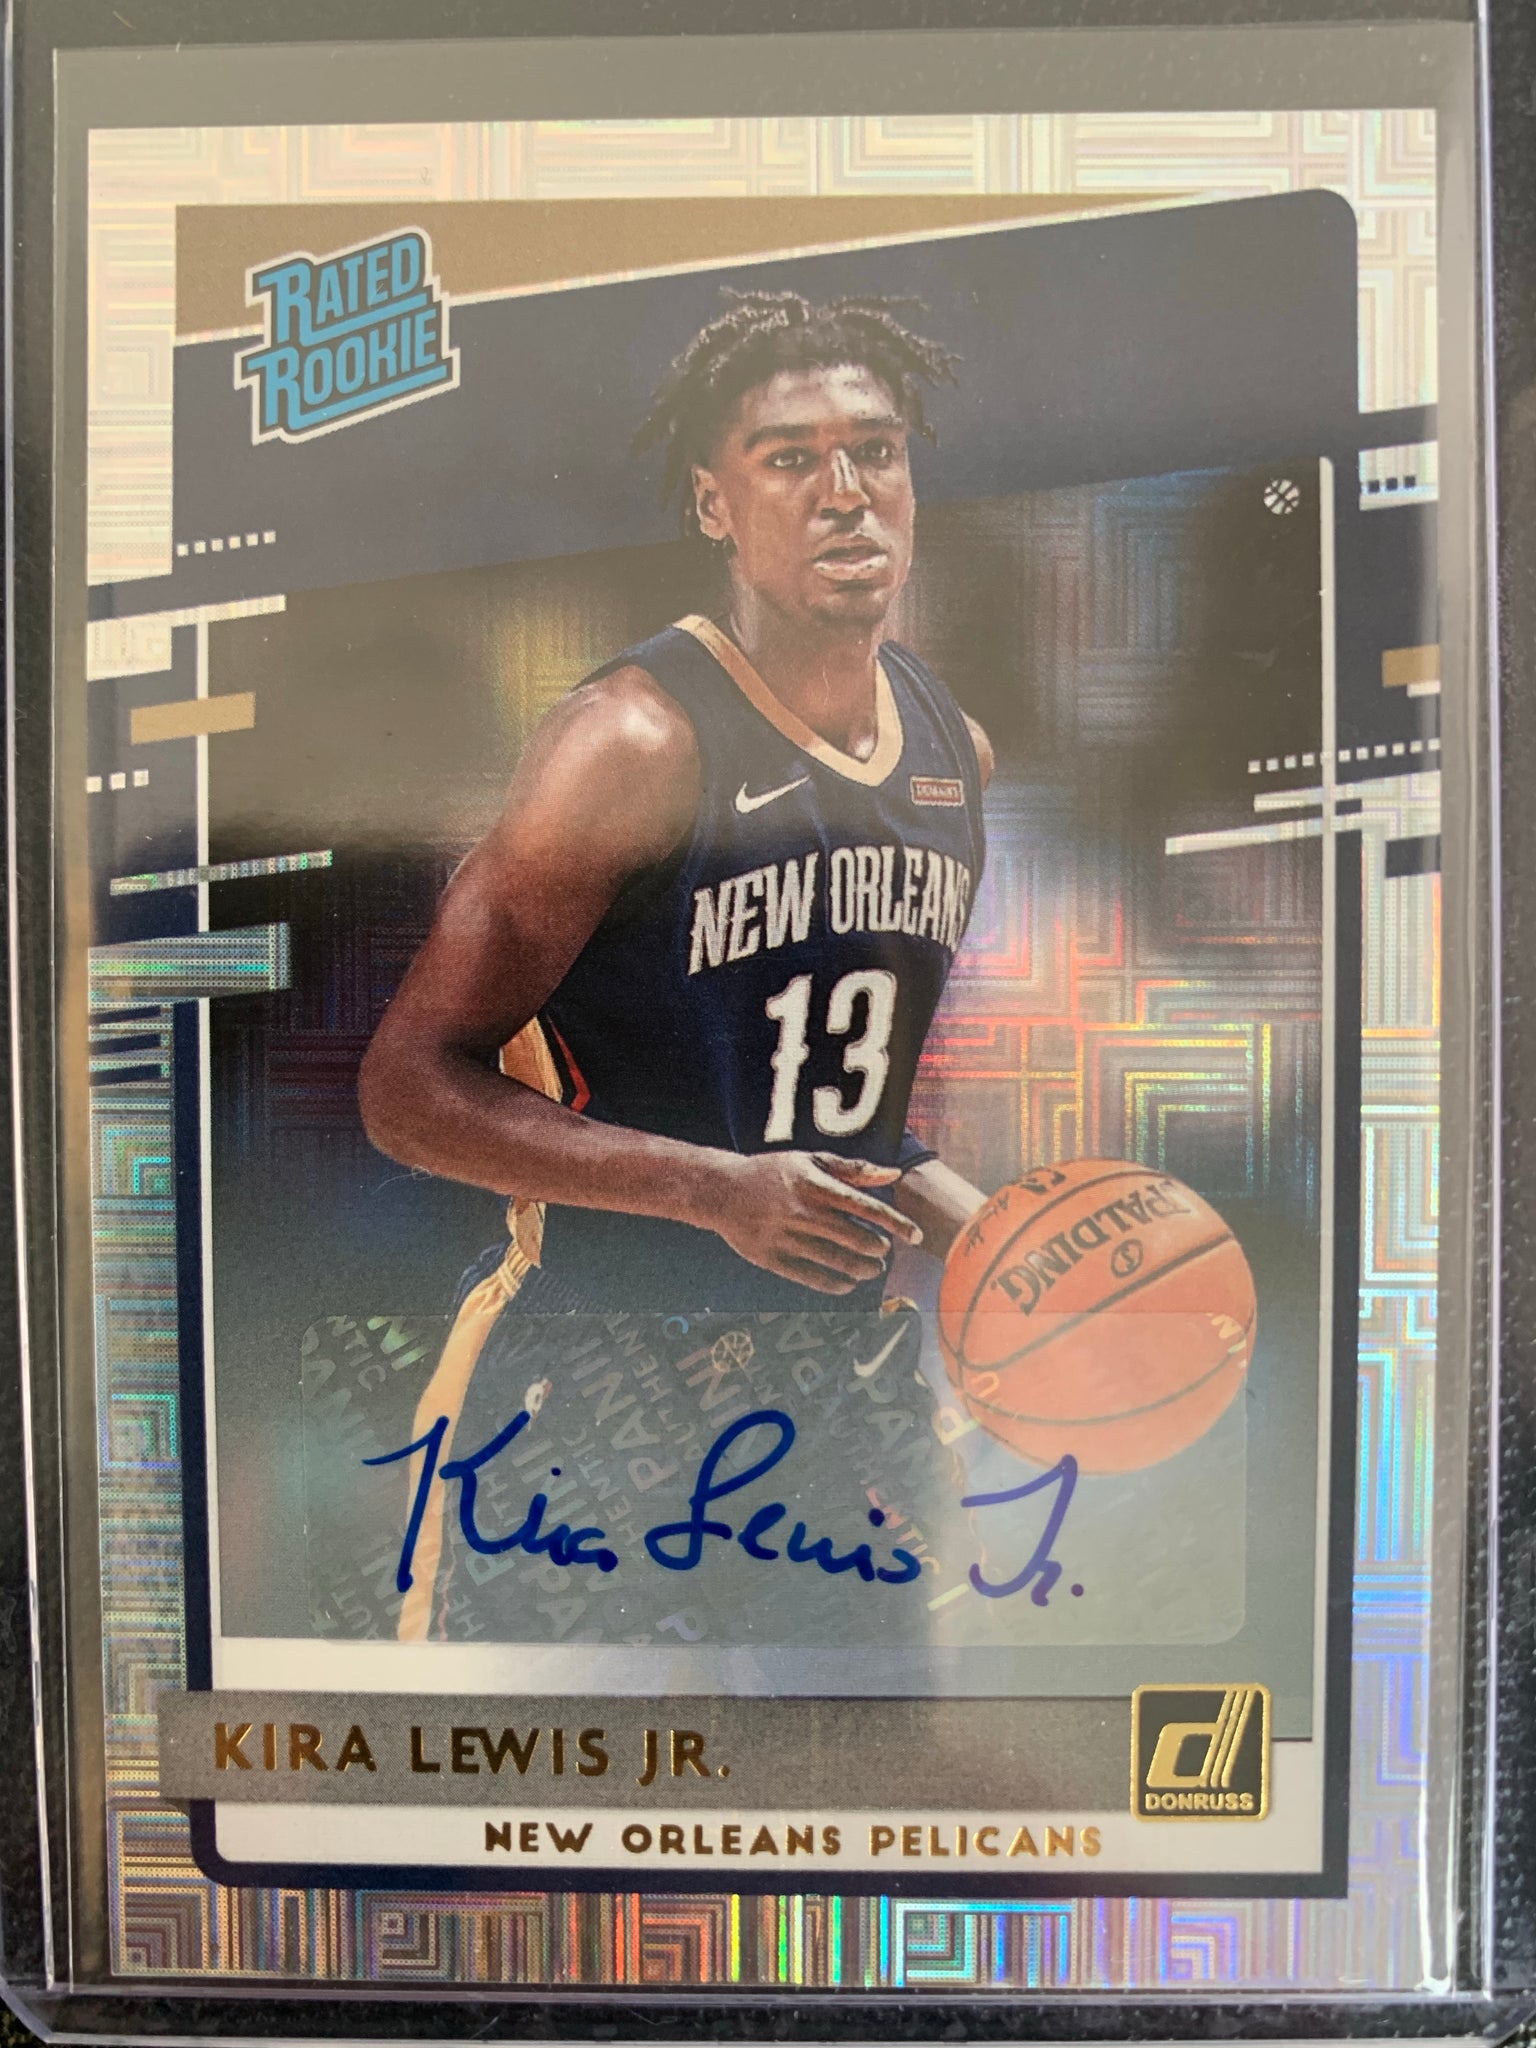 2020-2021 PANINI DONRUSS CHOICE NBA BASKETBALL #207 NEW ORLEANS PELICANS - KIRA LEWIS JR CHOICE SILVER AUTOGRAPHED RATED ROOKIE CARD